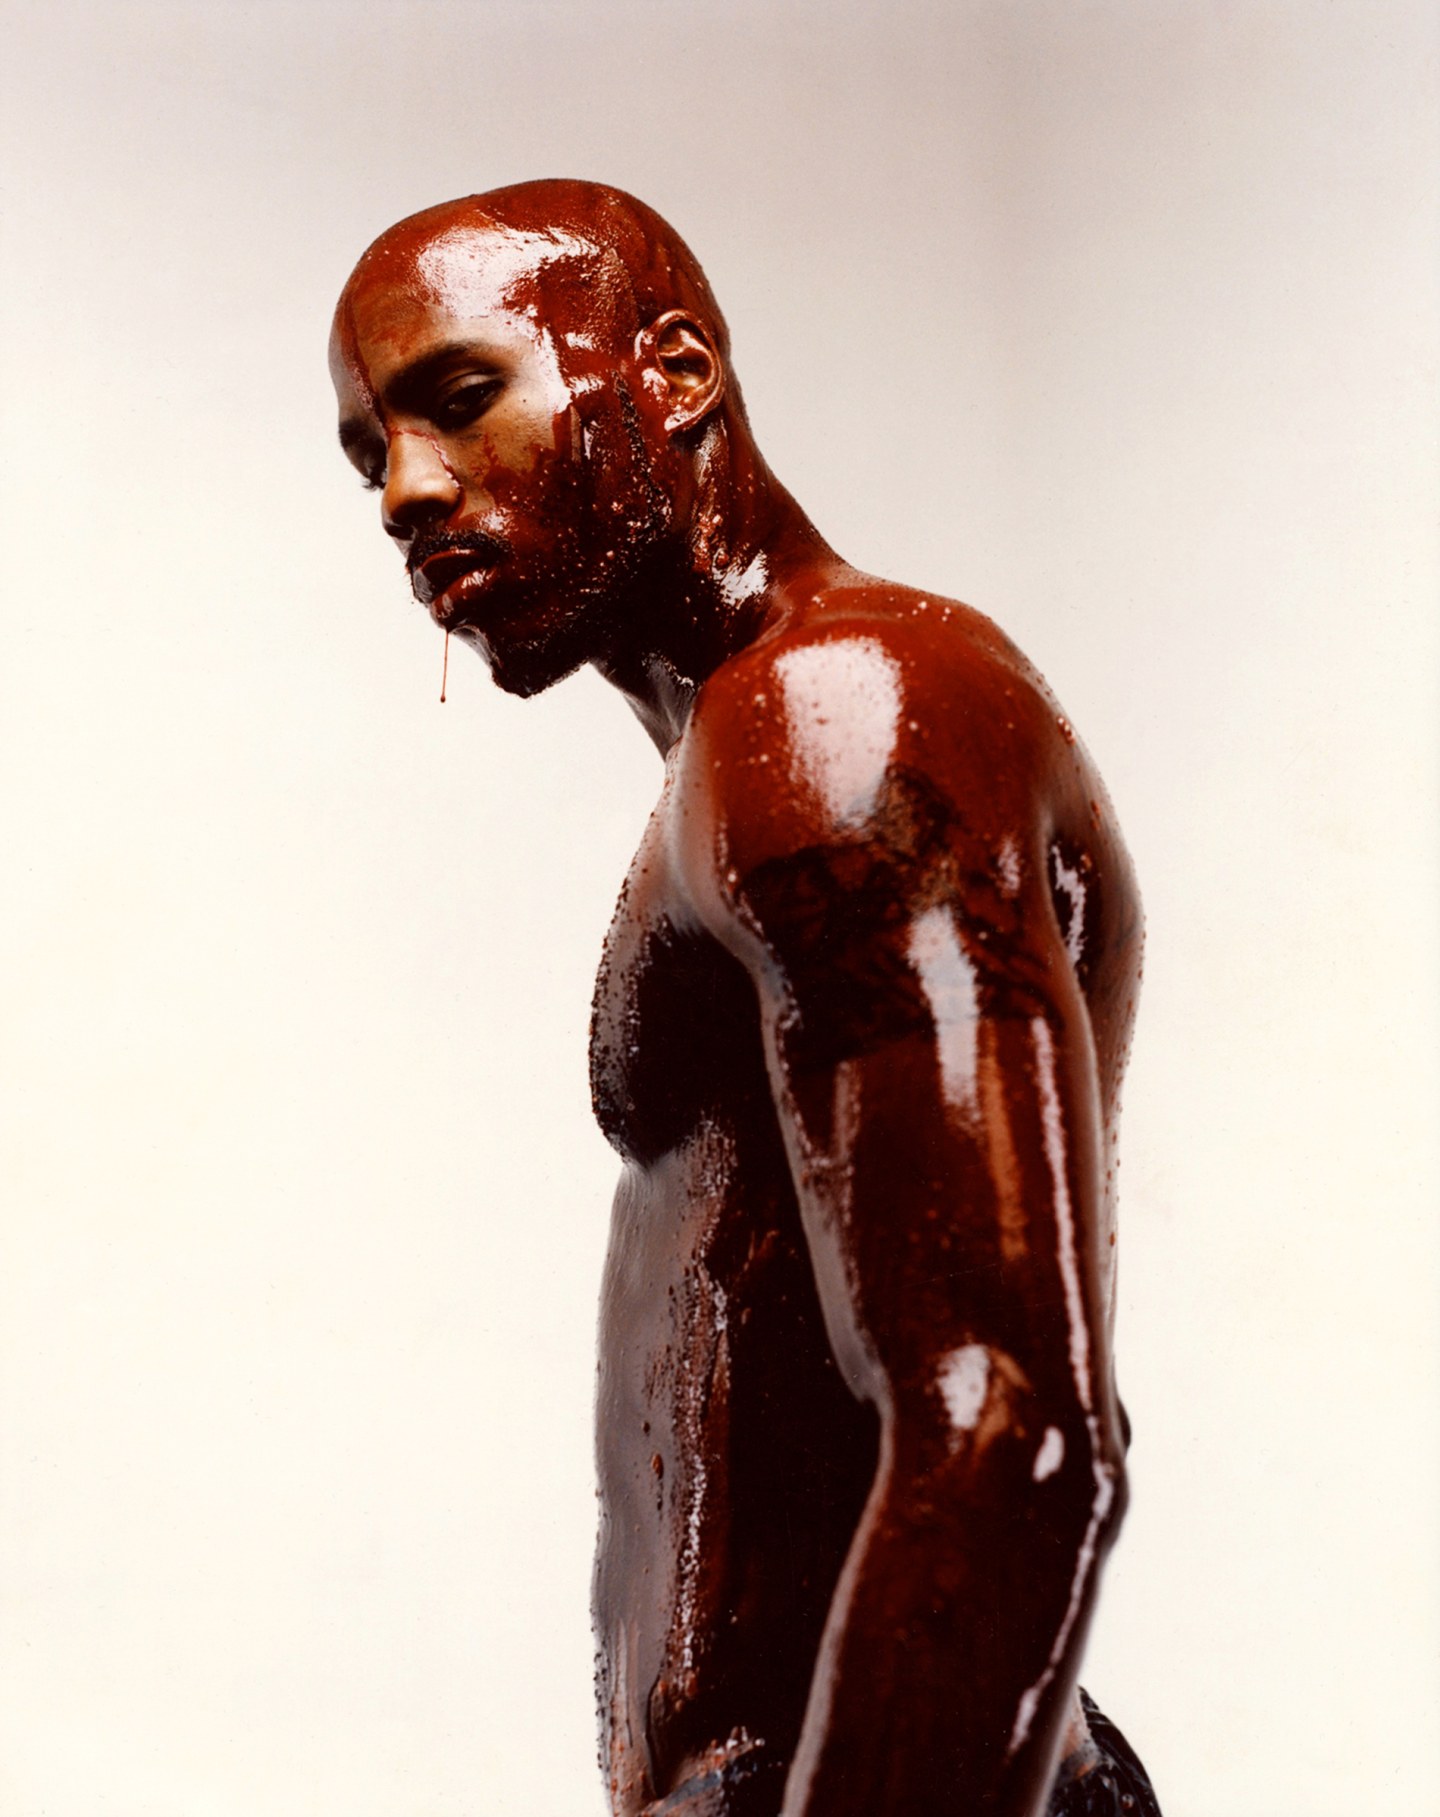 The True Story Behind DMX’s <i>Flesh of My Flesh, Blood of My Blood</i>